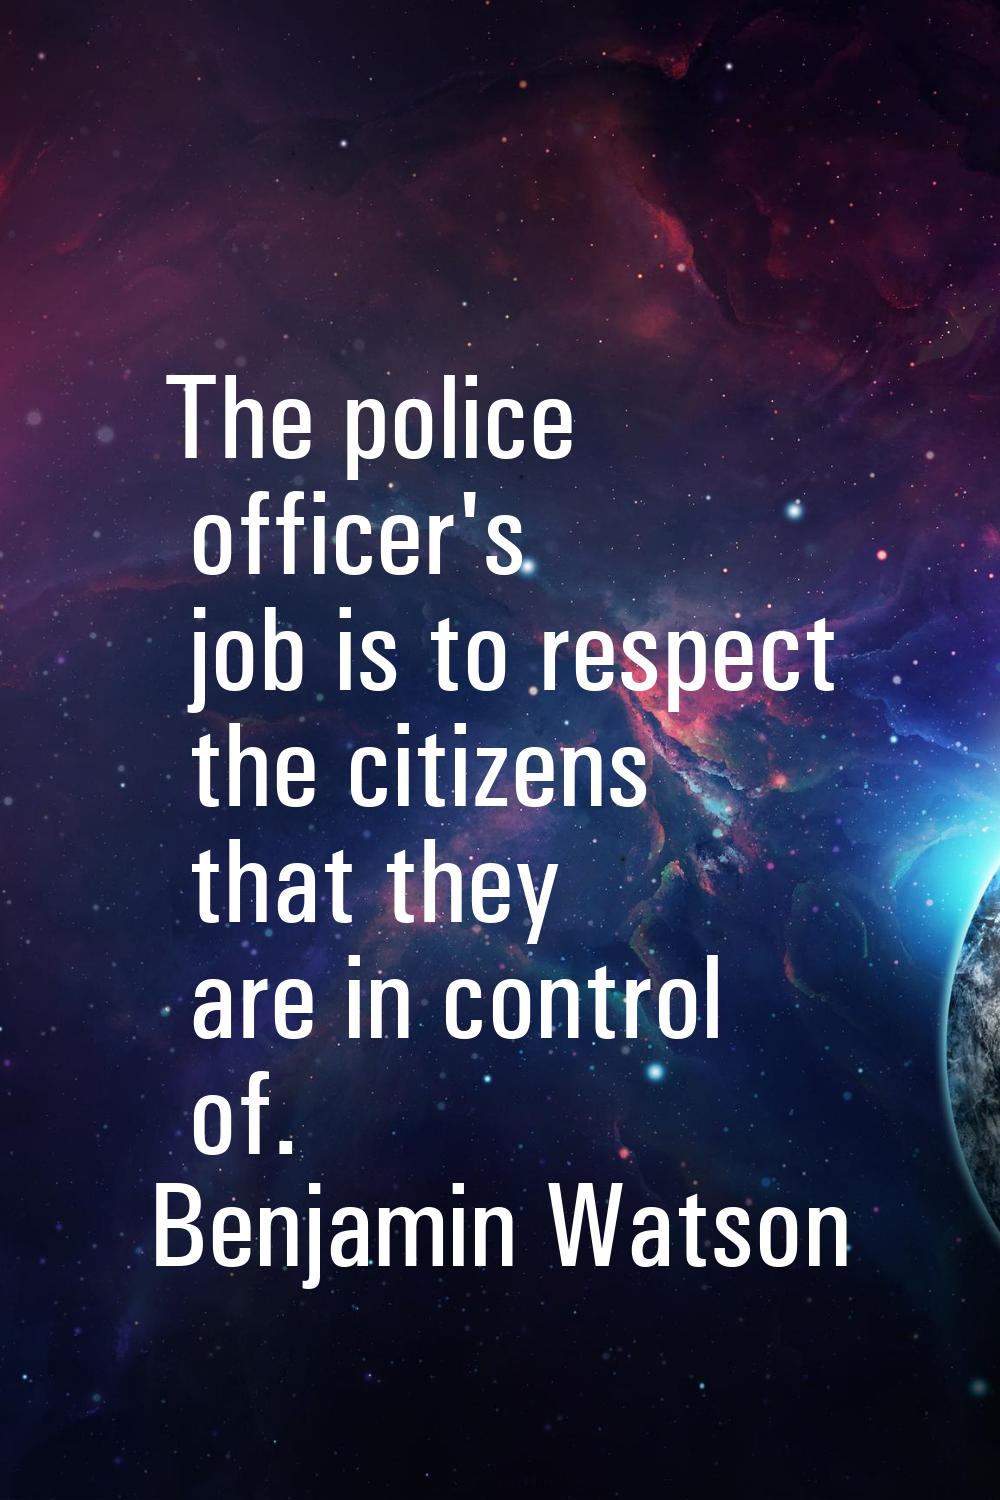 The police officer's job is to respect the citizens that they are in control of.